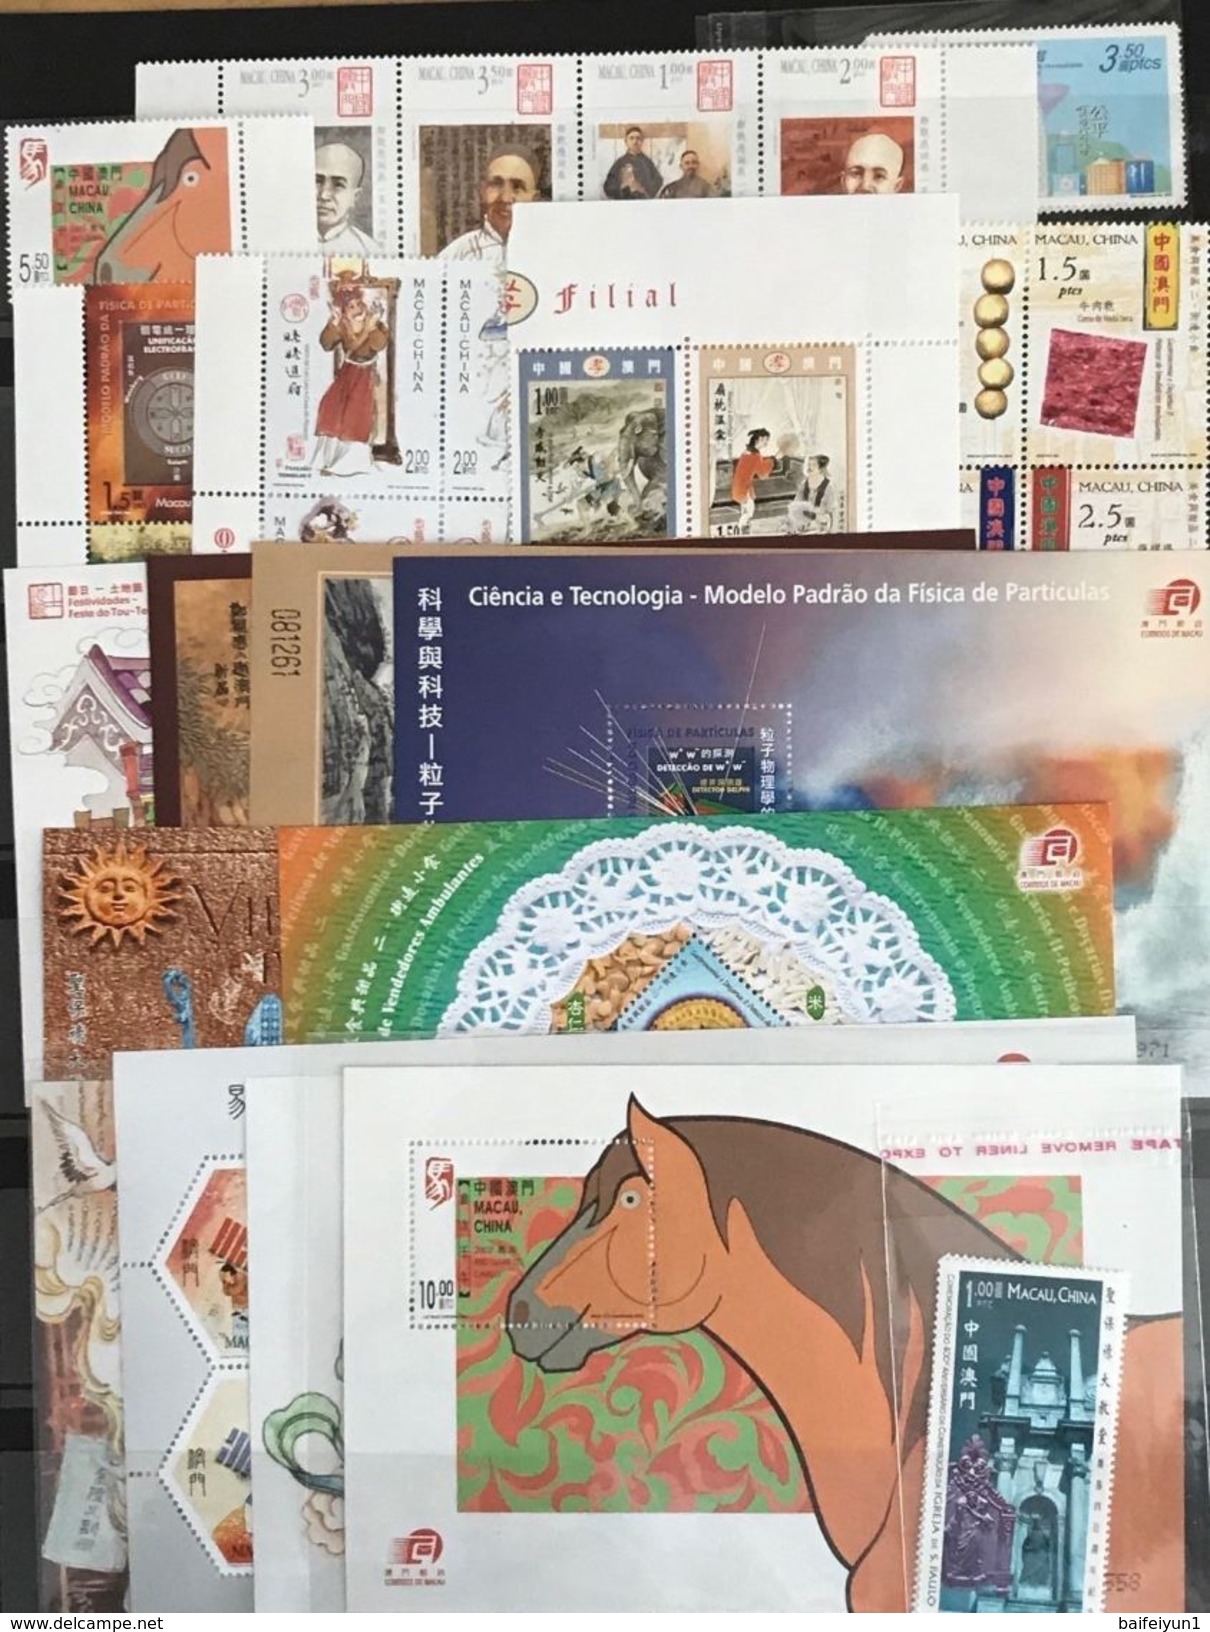 China Macau 2002 Whole Year Of Horse Full Stamps S/S Set - Full Years